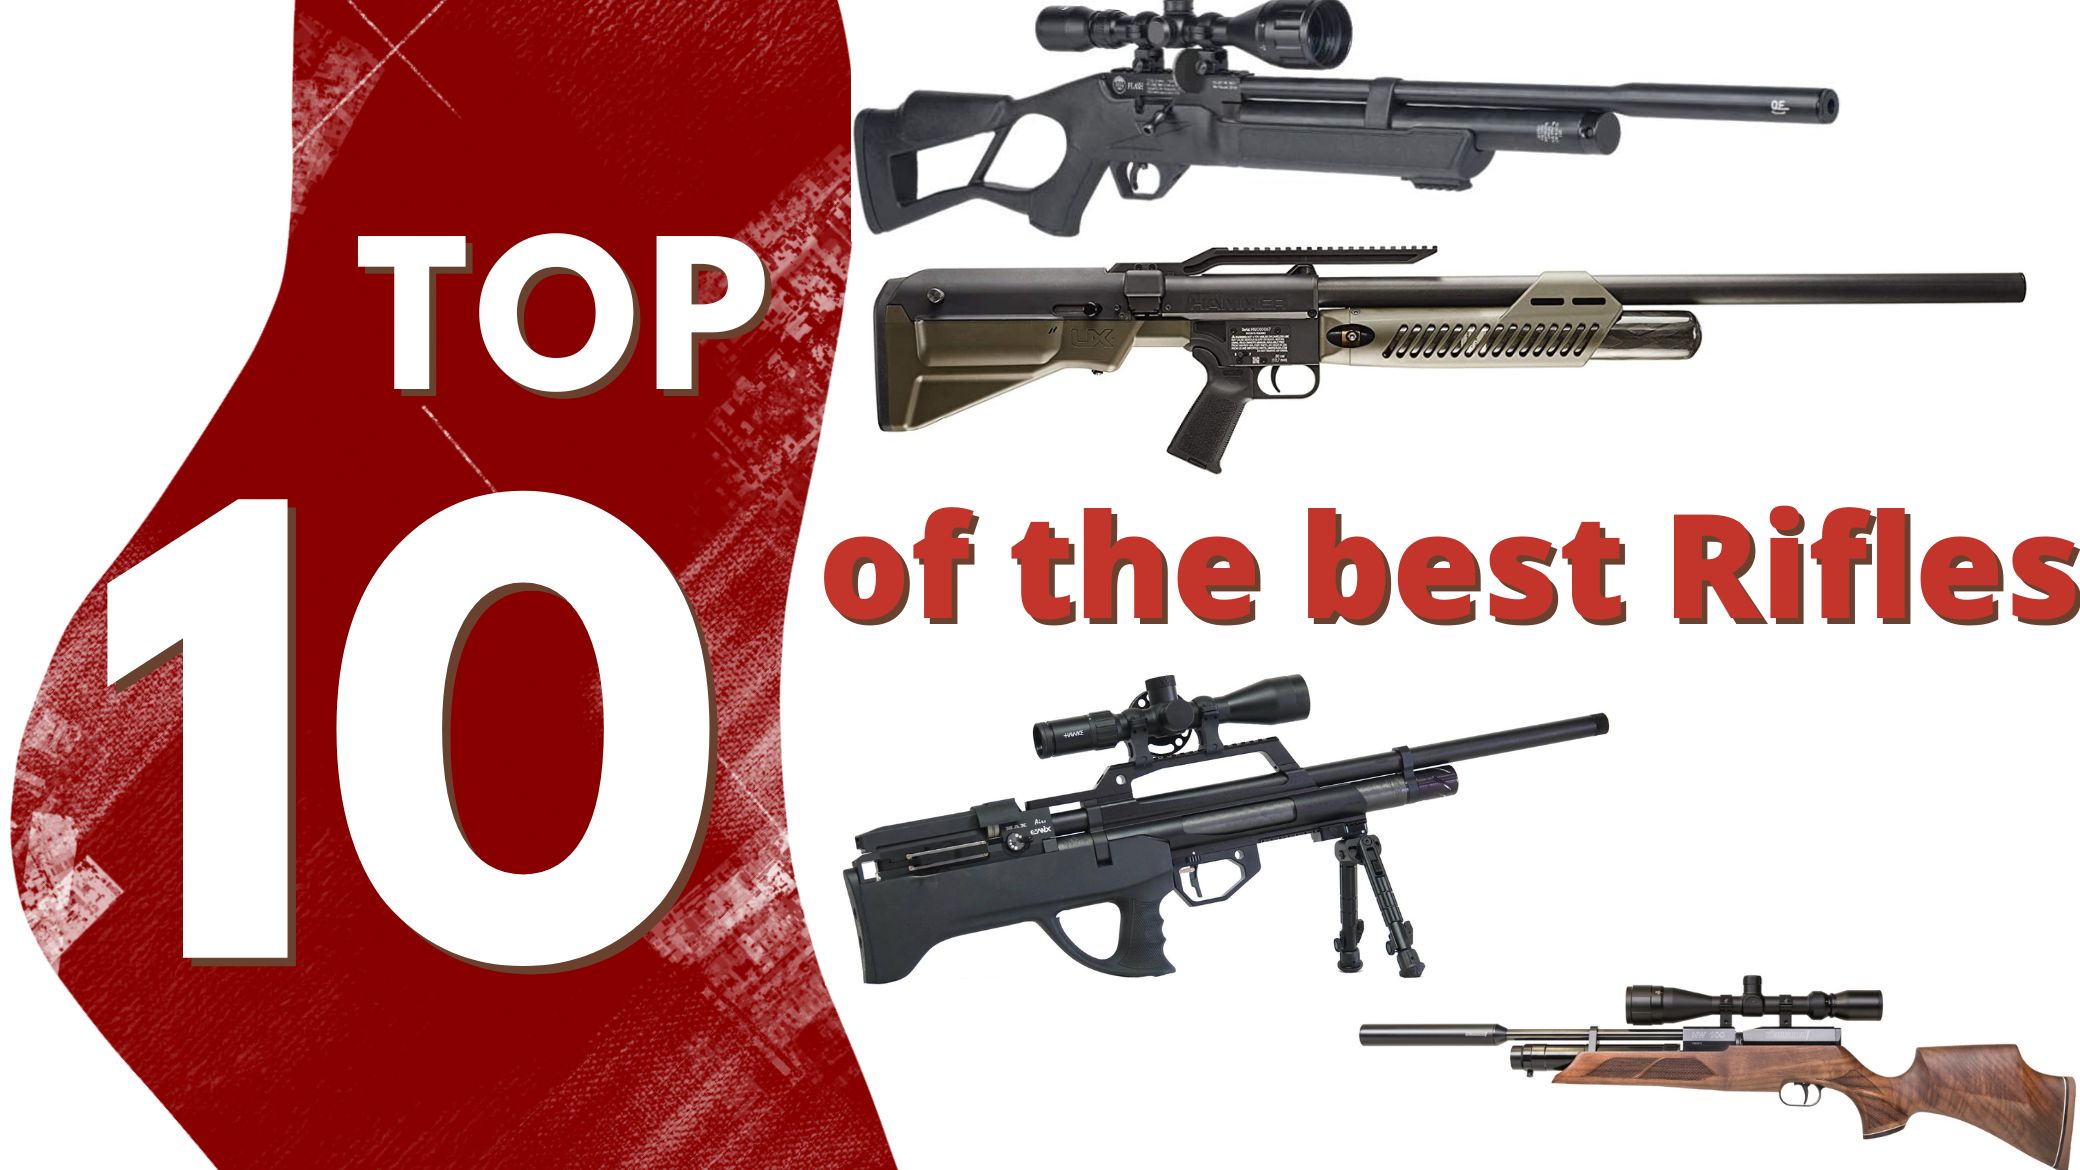 Top Rated Air Rifles